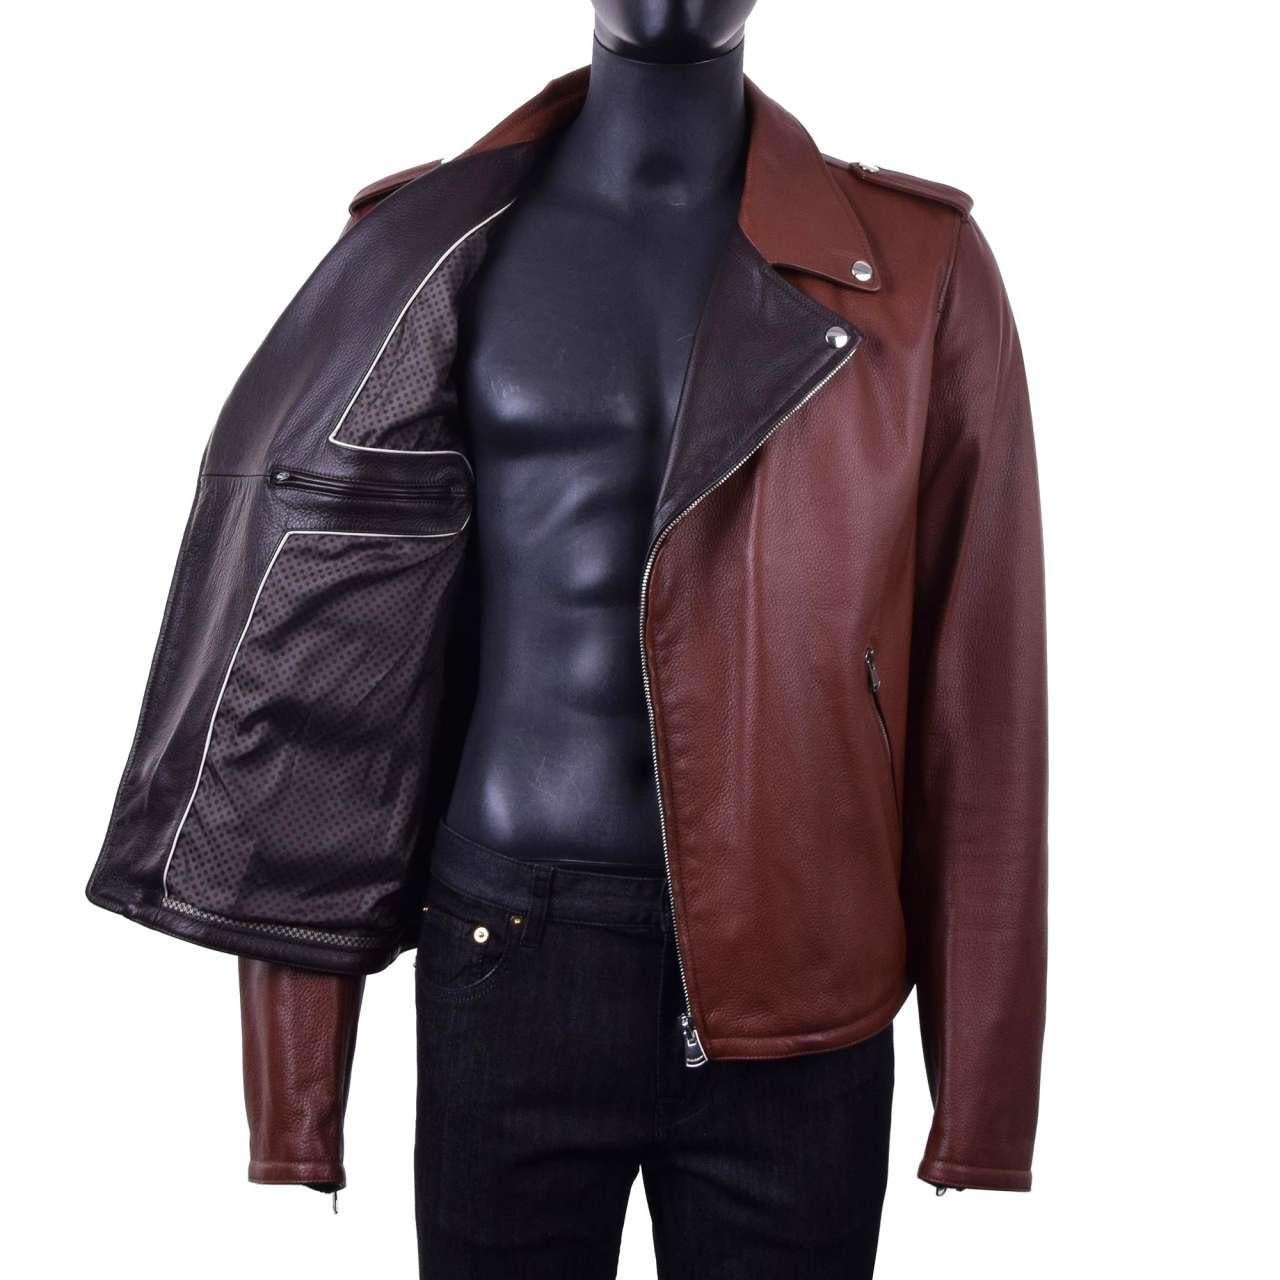 - Deer leather biker jacket with a wide cut contrast collar by DOLCE & GABBANA Black Line - New with tag - Former RRP: EUR 3.950 - MADE in ITALY - Model:G9DR2L-FUL1E-M0774 - Material: 100% Deerskin - Lining: 50% Acetat, 30% Cupro, 20% Hirschleder -